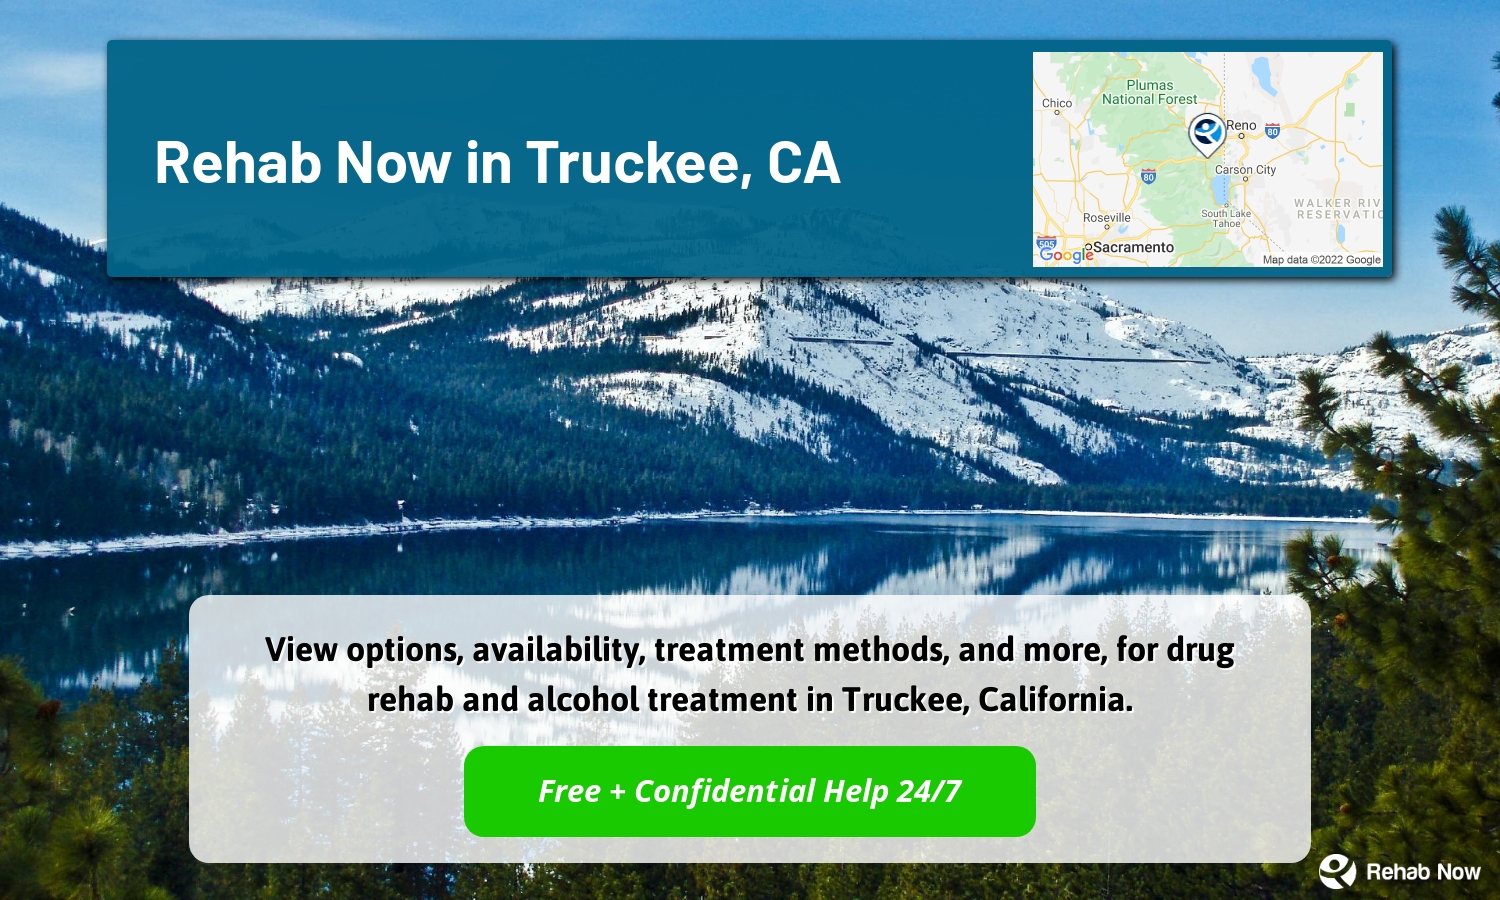 View options, availability, treatment methods, and more, for drug rehab and alcohol treatment in Truckee, California.